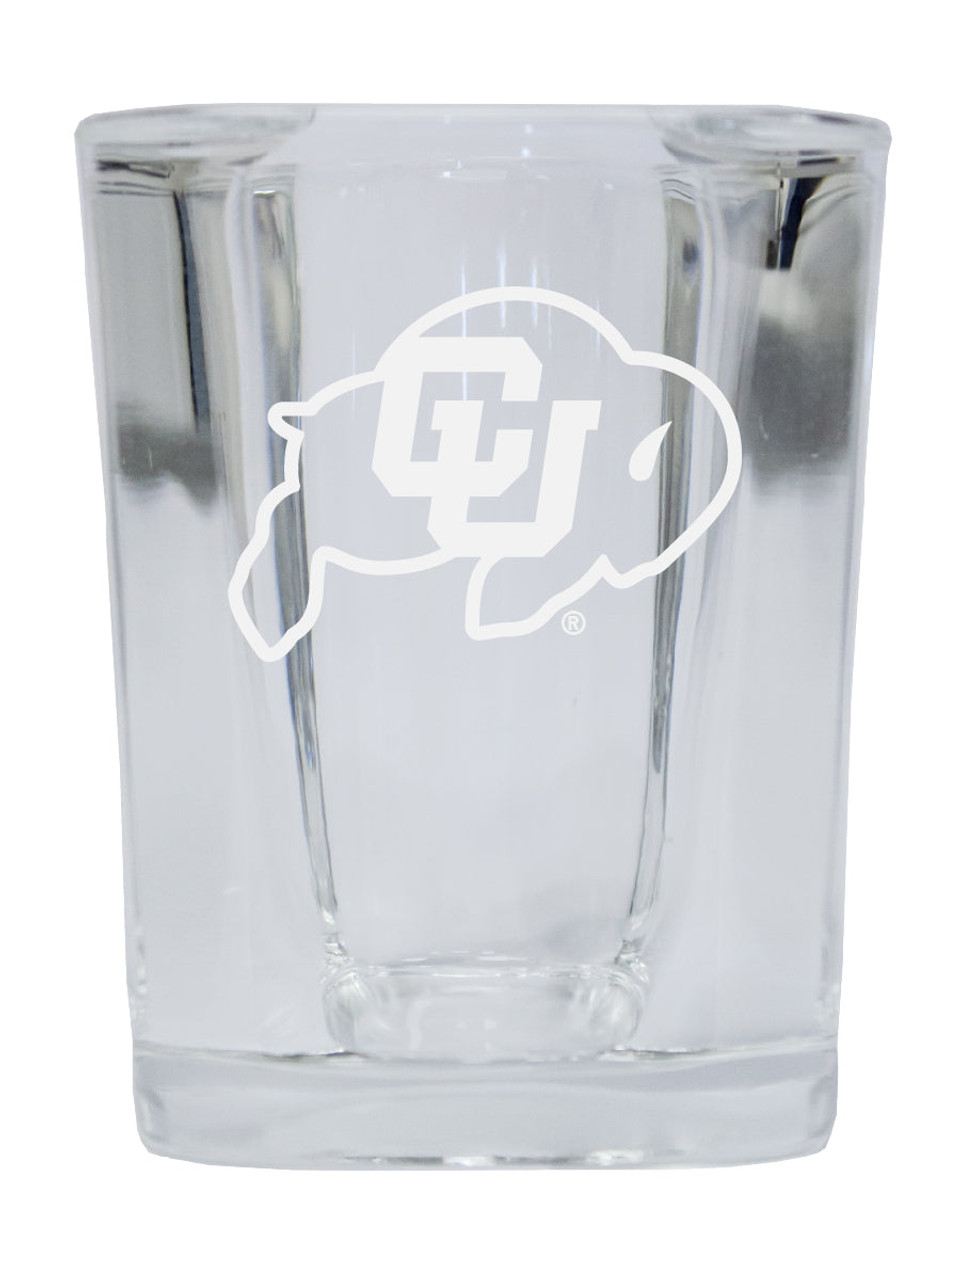 Colorado Buffaloes 2 Ounce Square Shot Glass laser etched logo Design